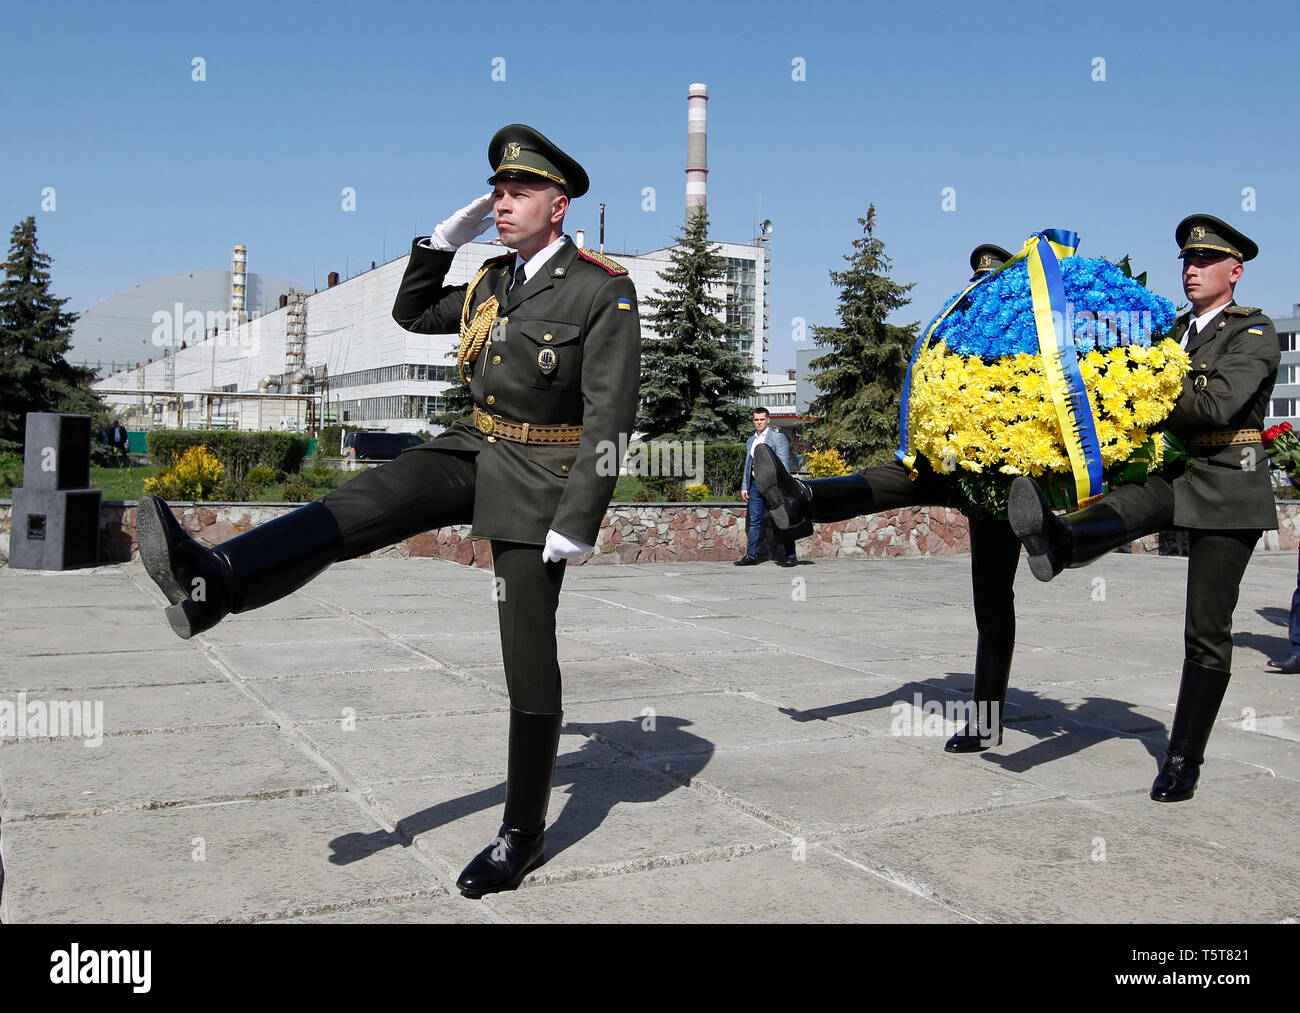 Ukrainian soldiers are seen with flowers during the anniversary. Ukrainians marked the 33rd anniversary of Chernobyl catastrophe. The explosion of the fourth block of the Chernobyl nuclear plant on 26 April 1986 is still regarded as the biggest accident in the history of nuclear power generation. Stock Photo